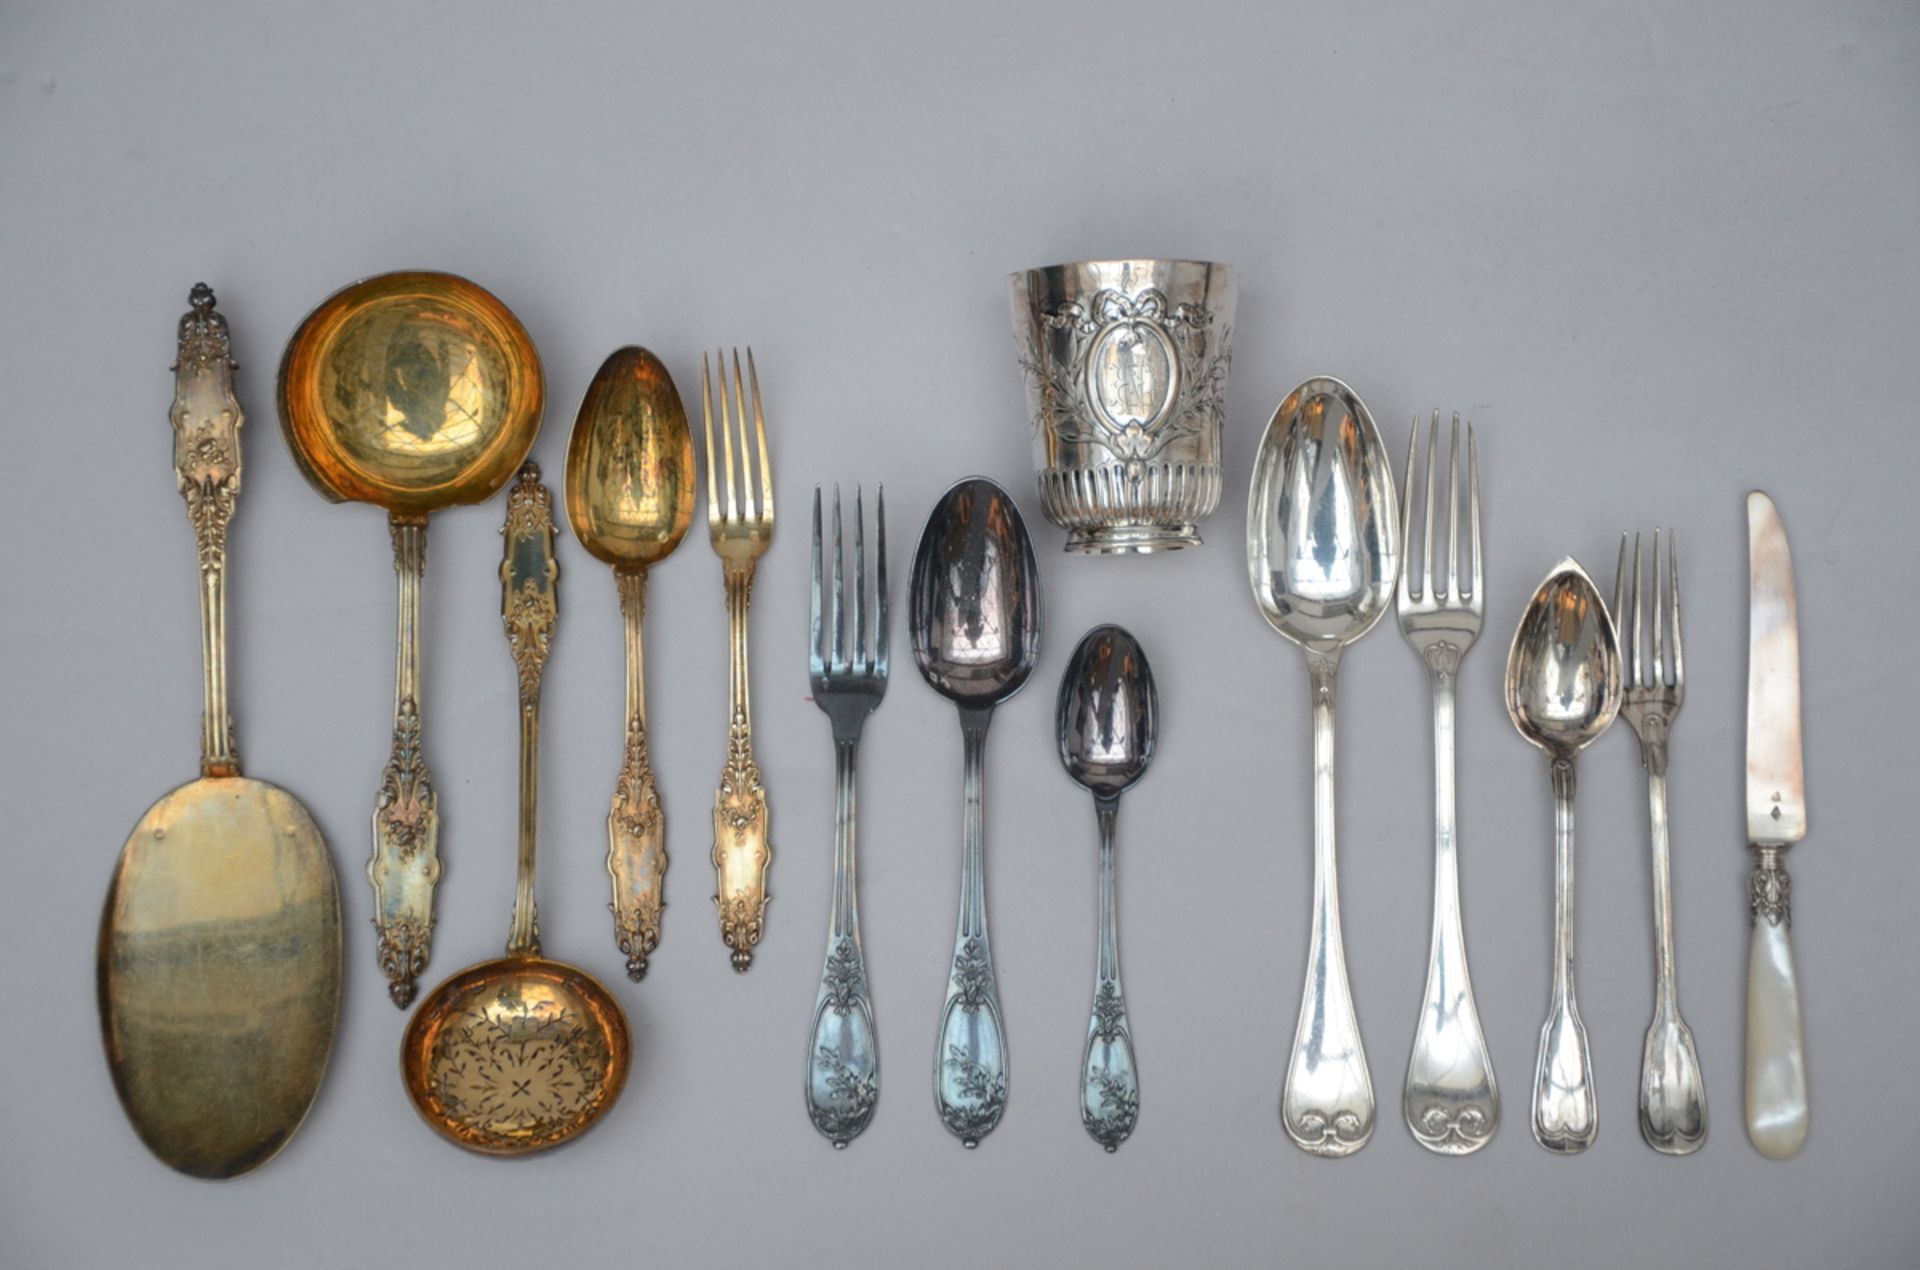 Two different ecrins with silver cutlery, ecrin birth gift, part of a silver menagere in gilt - Image 2 of 5